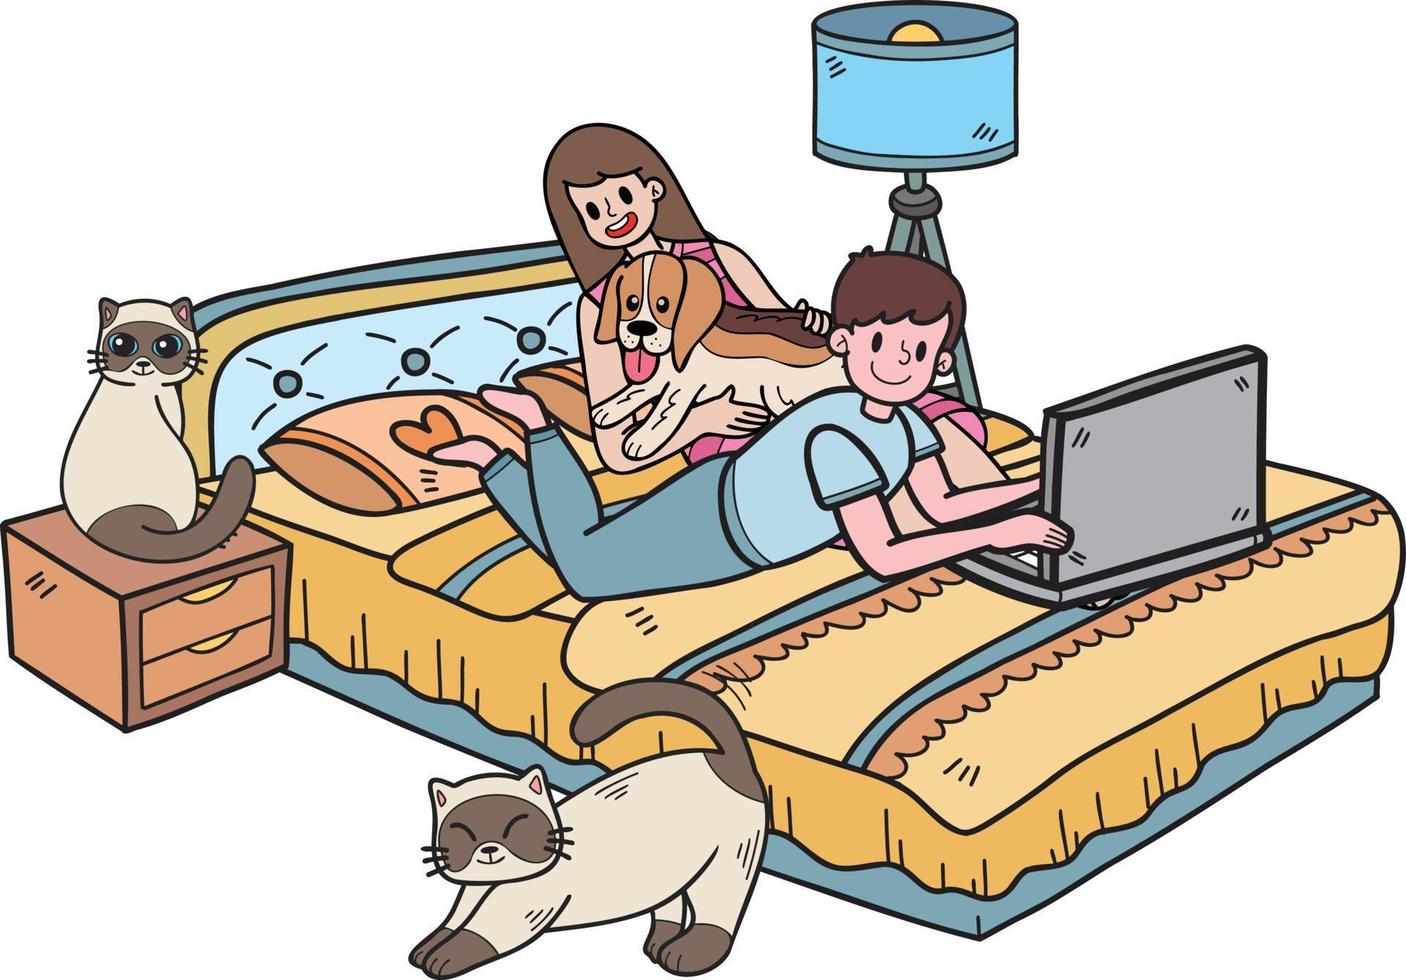 Hand Drawn Owner working on laptop with dog and cat in bedroom illustration in doodle style vector